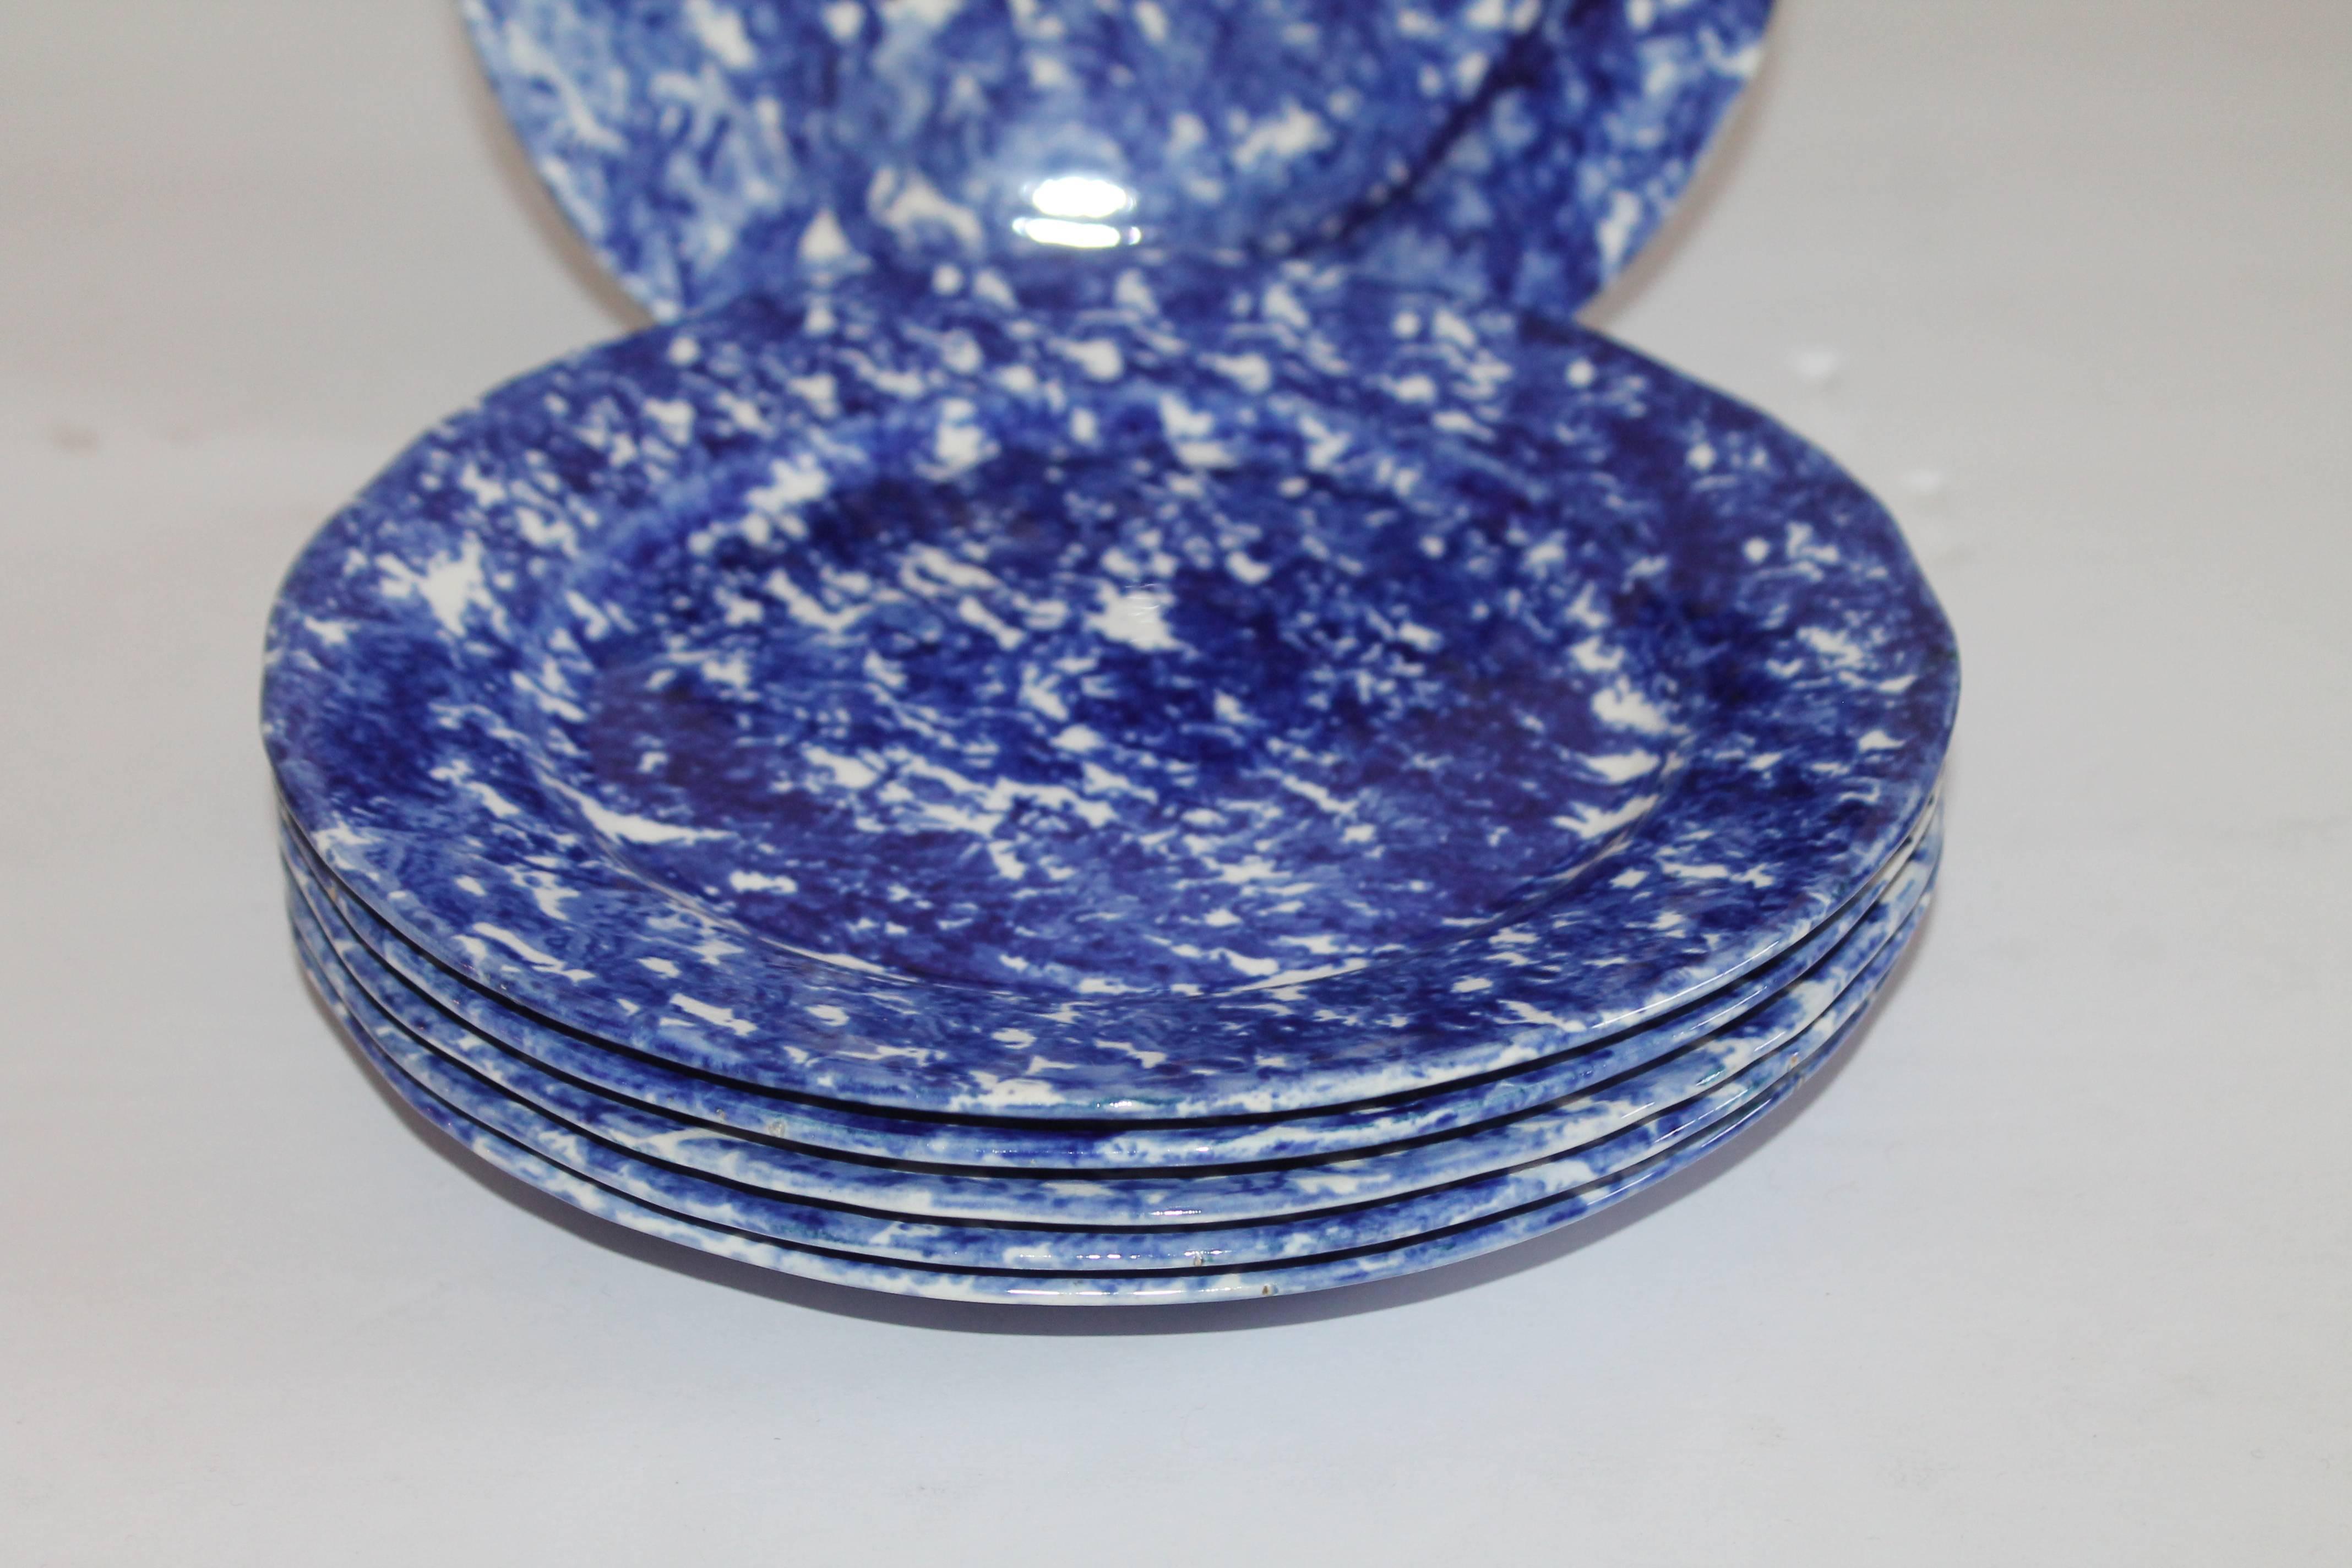 These amazing hand-painted and glazed American sponge ware plates are a perfect matched set. They are in pristine condition.